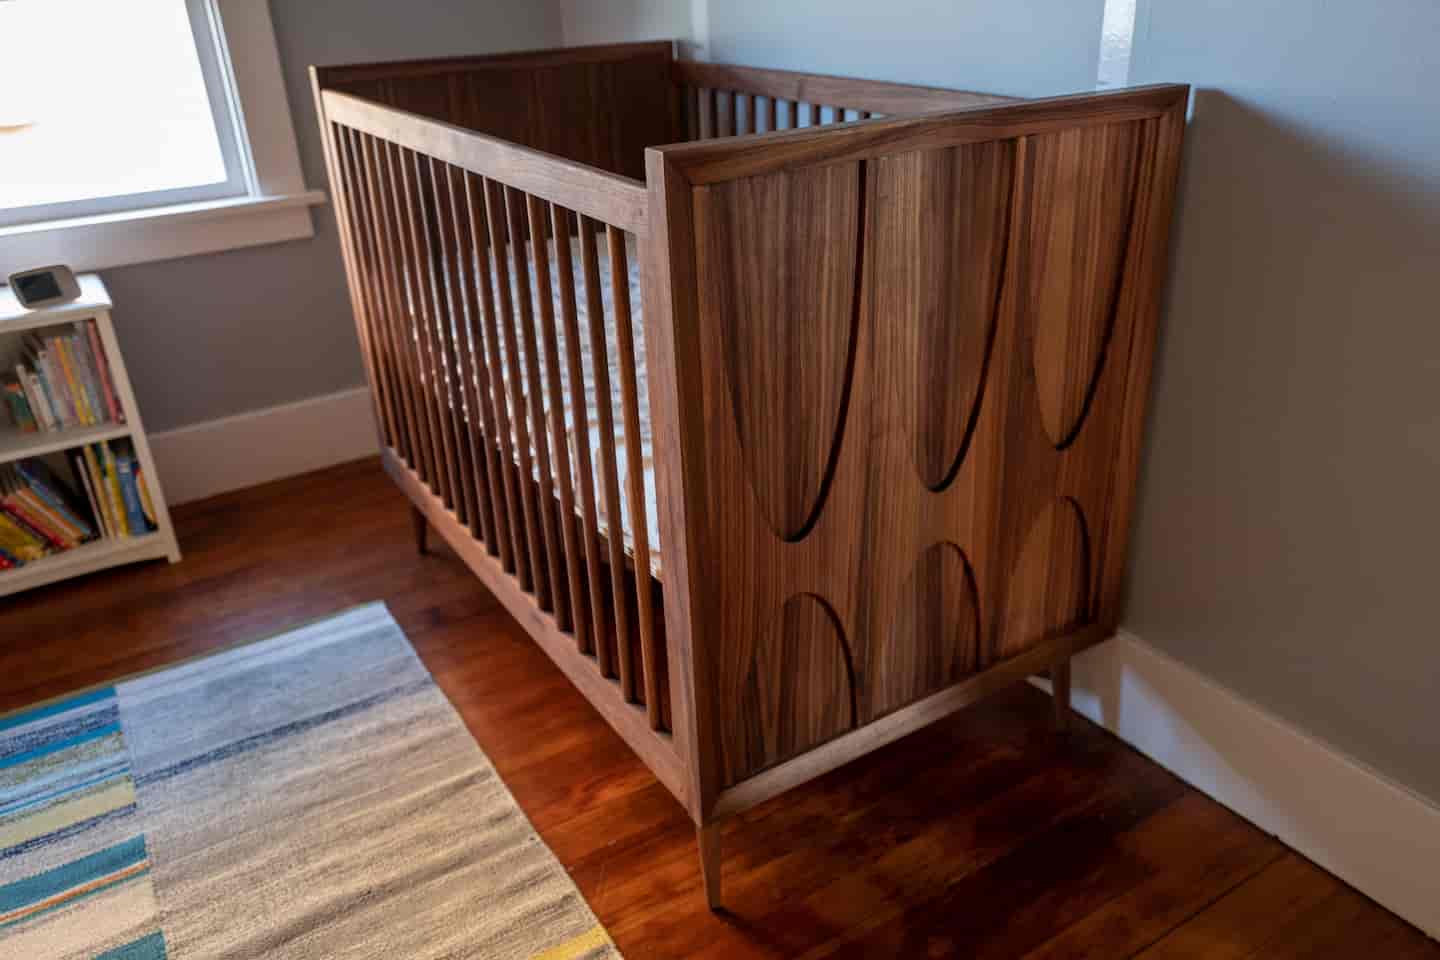 Side view of midcentury crib